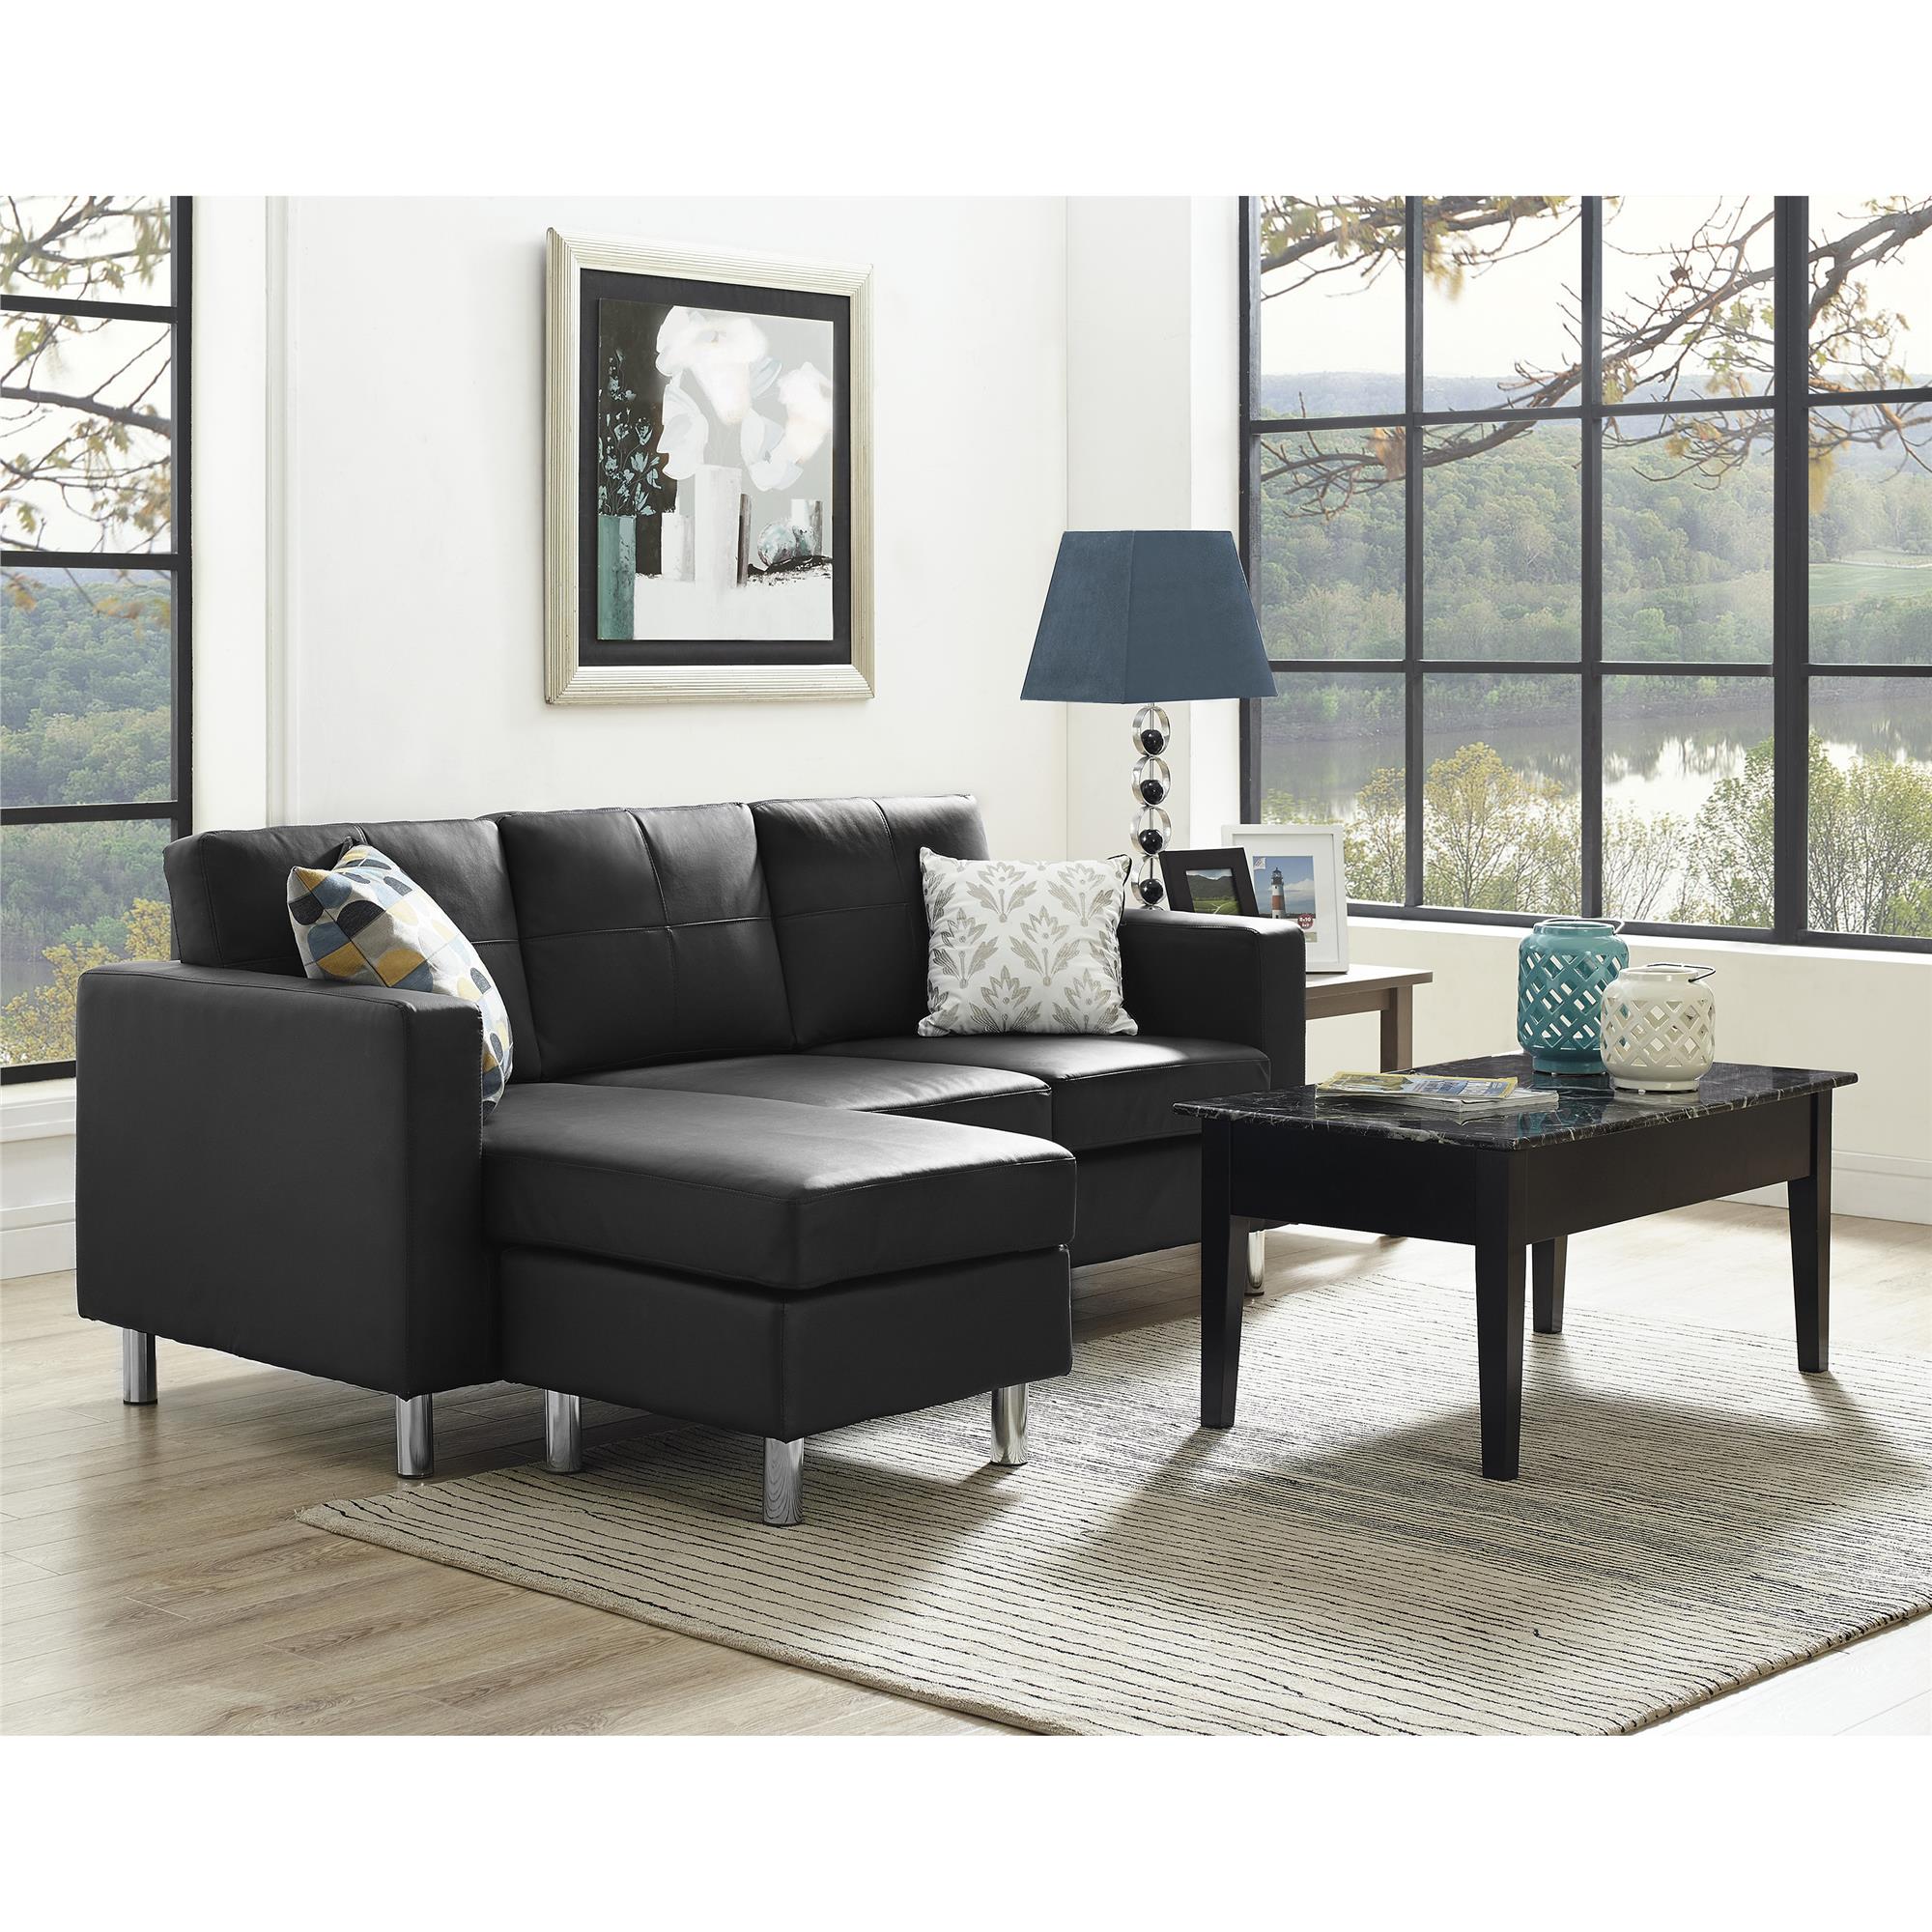 DHP Small Spaces Configurable Sectional Sofa, Multiple Colors - Black - image 1 of 6